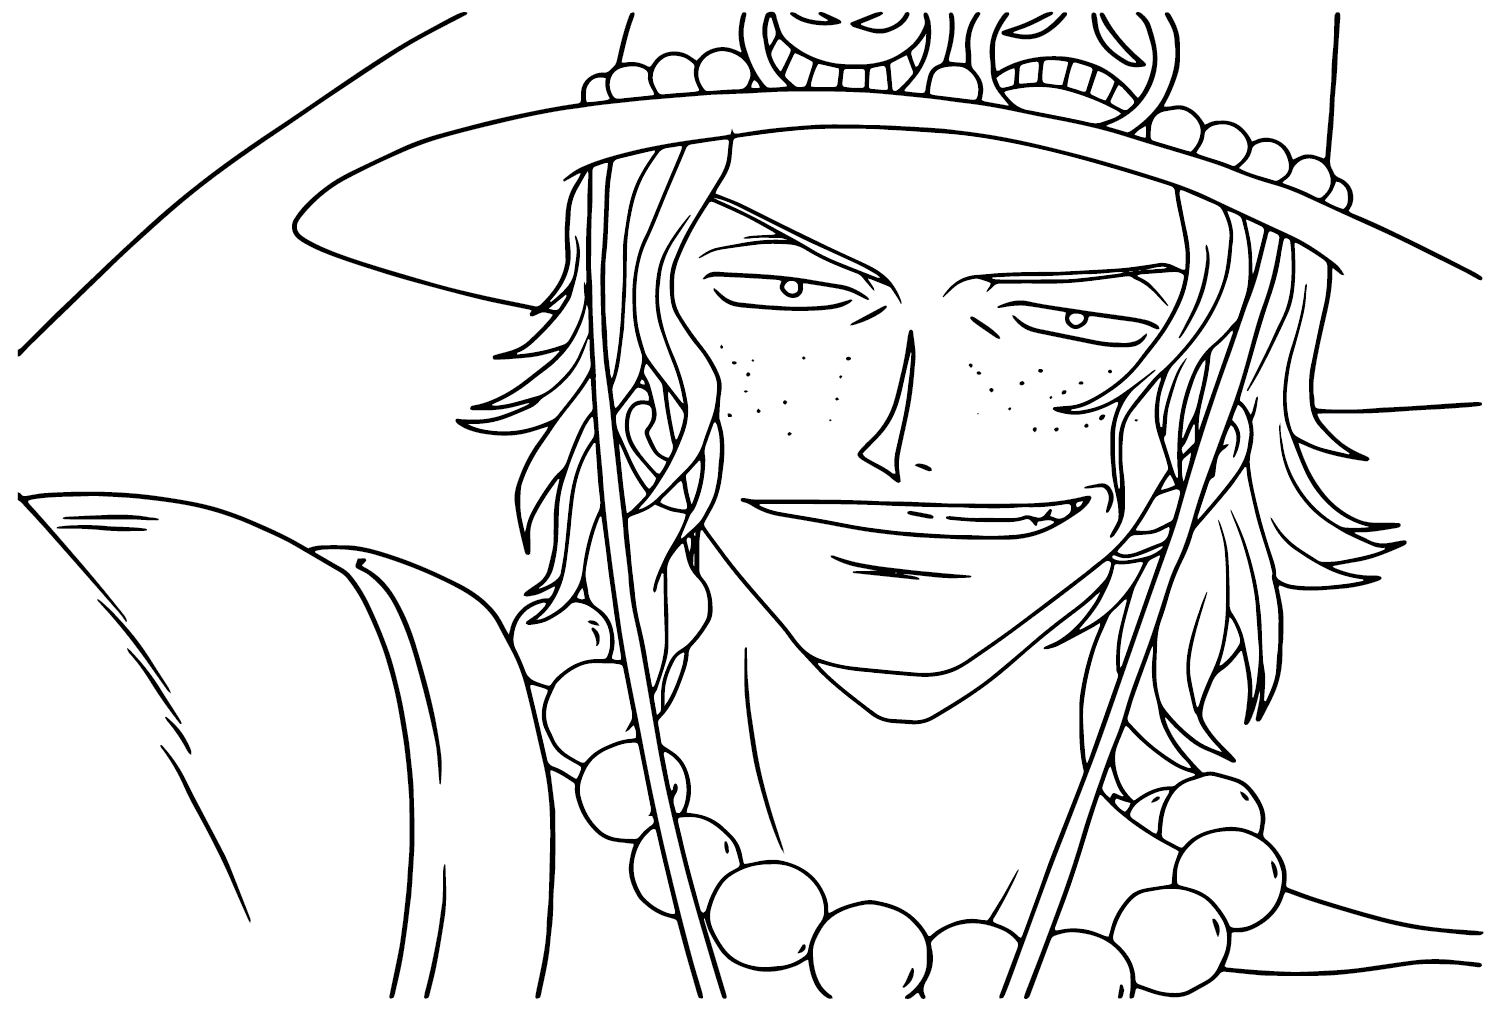 Portgas D. Ace Coloring Sheet for Kids from Portgas D. Ace